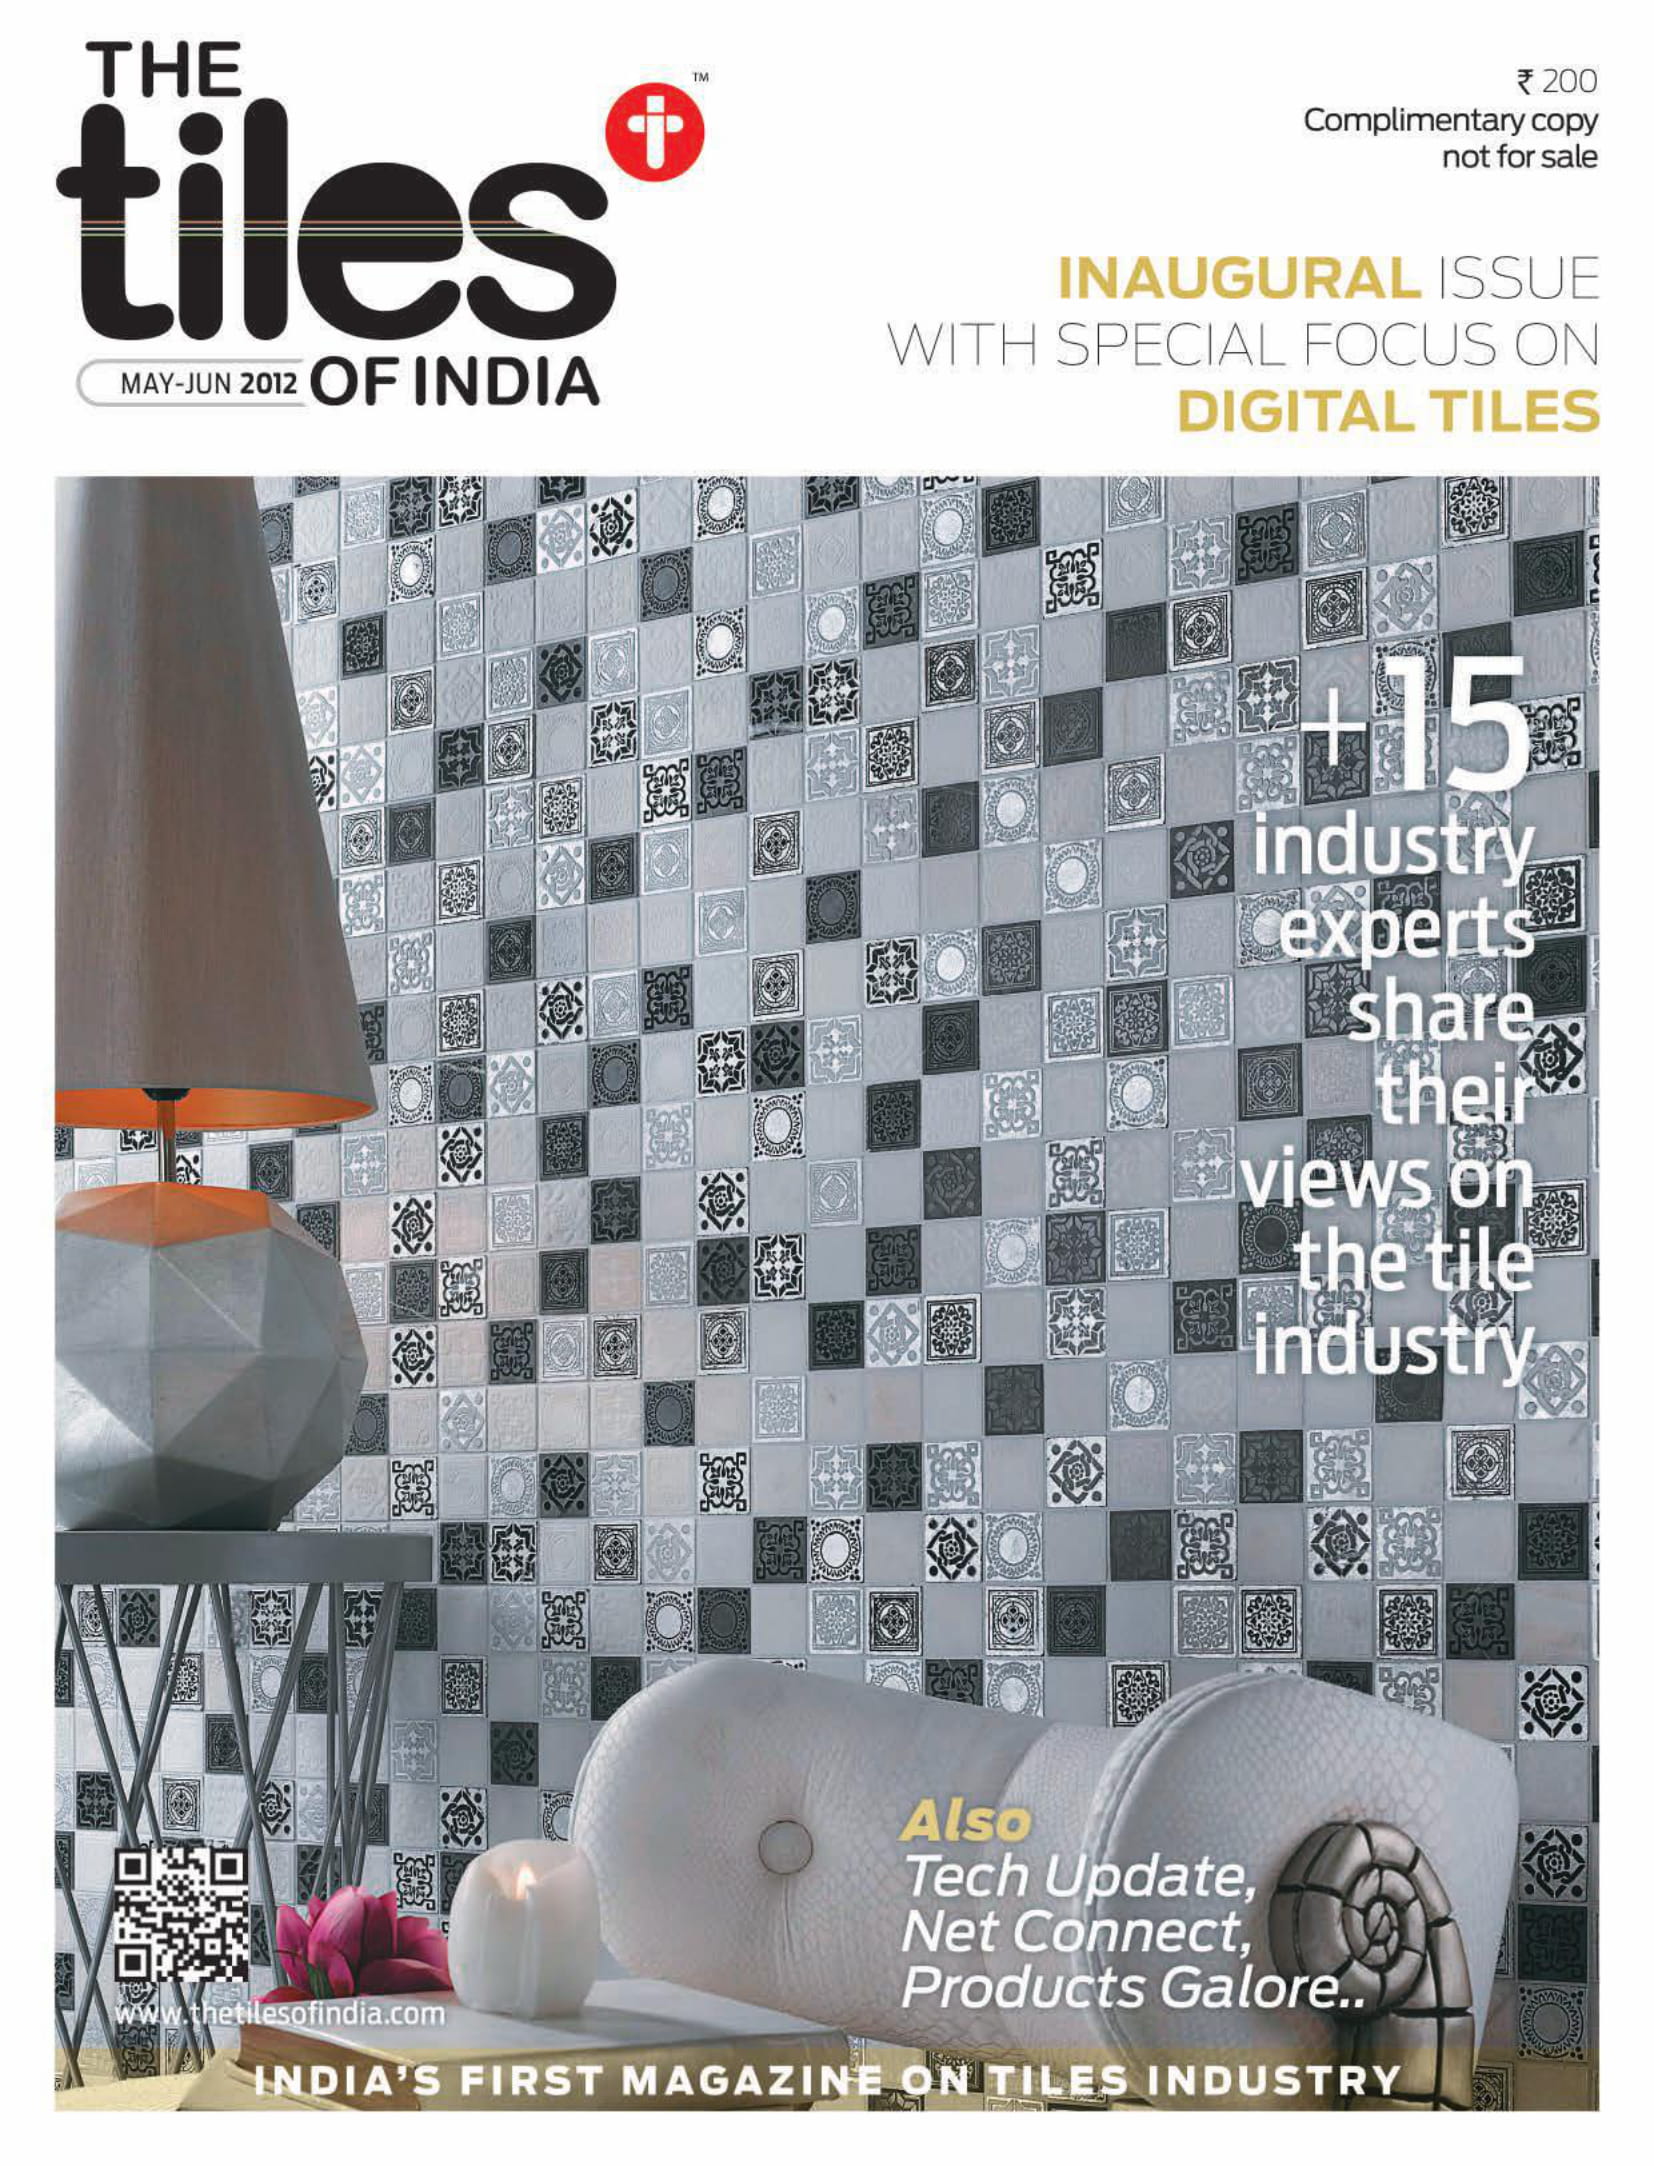 The Tiles of India Magazine - May Jun 2012 Issue